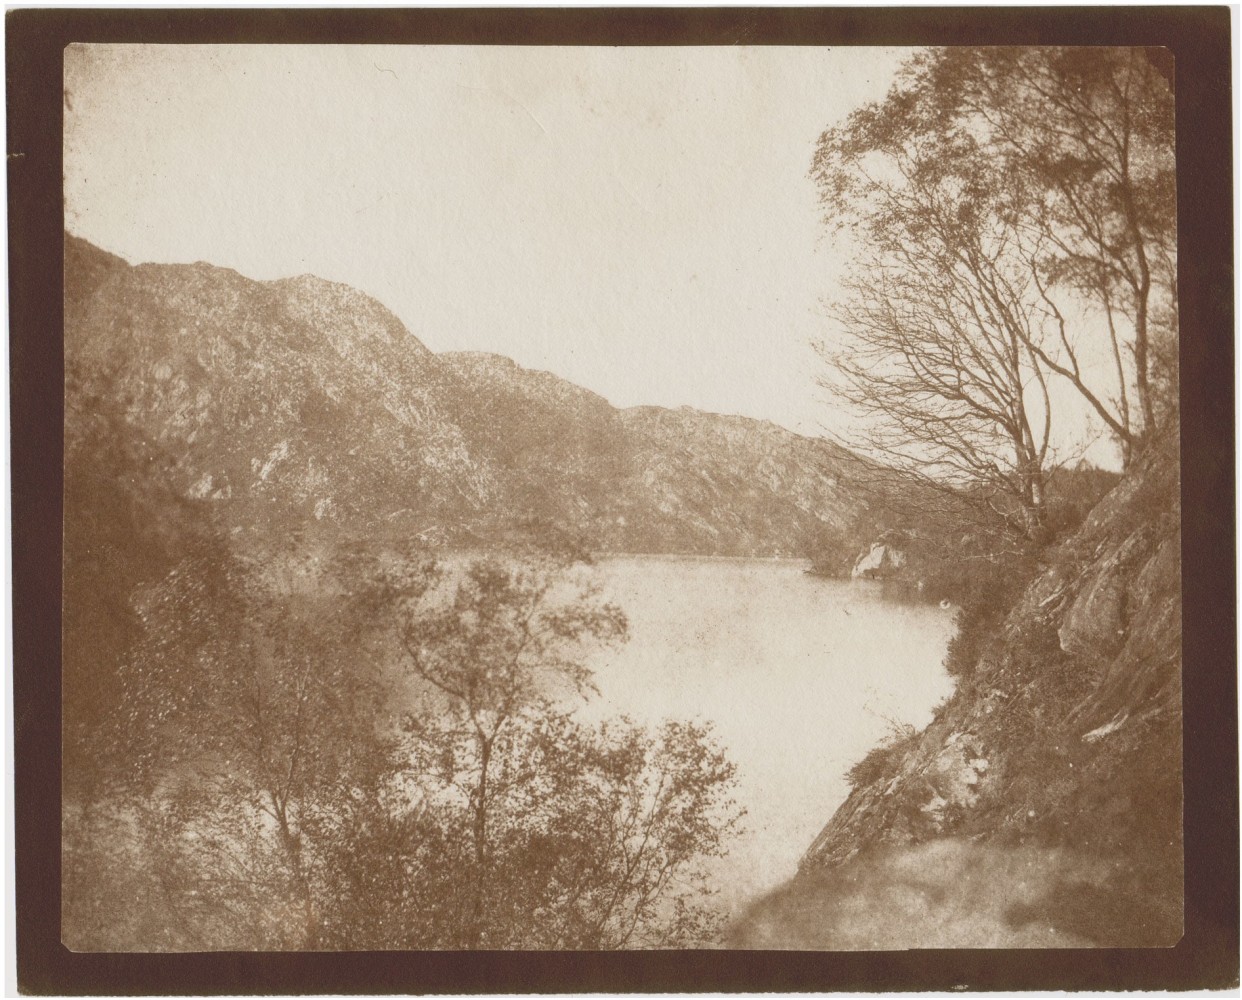 William Henry Fox TALBOT (English, 1800-1877) Loch Katrine, 1844 Salt print from a calotype negative 17.0 x 20.9 cm on 18.6 x 22.9 cm paper &quot;LA36&quot; in black ink on verso